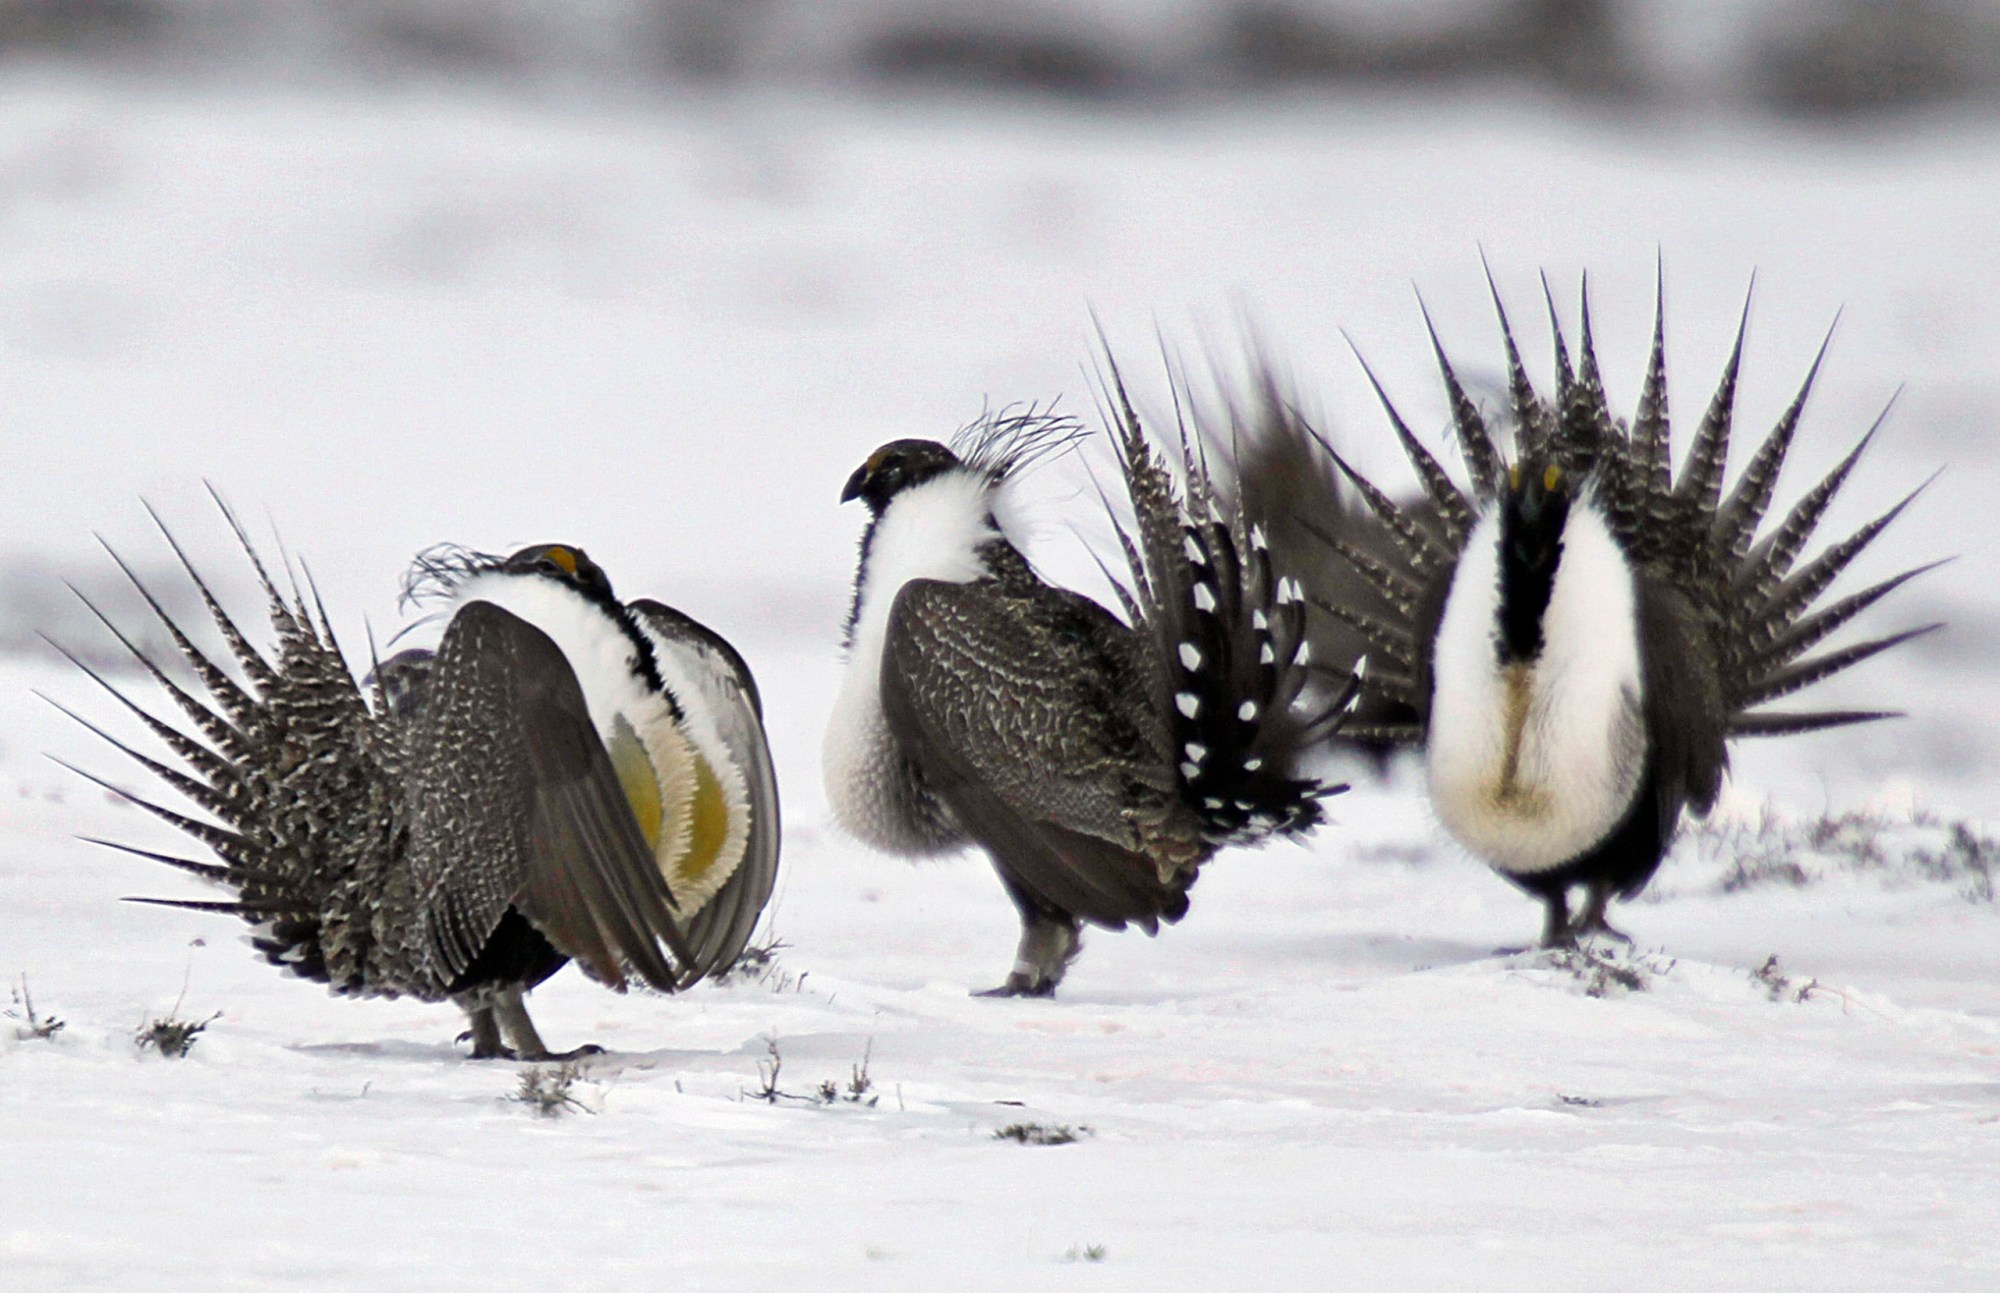 In this April 20, 2013 photo, male greater sage grouse perform mating rituals for a female grouse, not pictured, on a lake outside Walden, Colo. The Bureau of Land Management released a nearly 1,000-page document late Thursday, Aug. 11, 2016, proposing restrictions on energy development, roads and grazing. The proposed restrictions aim to protect the rare Gunnison sage grouse, a bird found only in Colorado and Utah. (AP Photo/David Zalubowski)